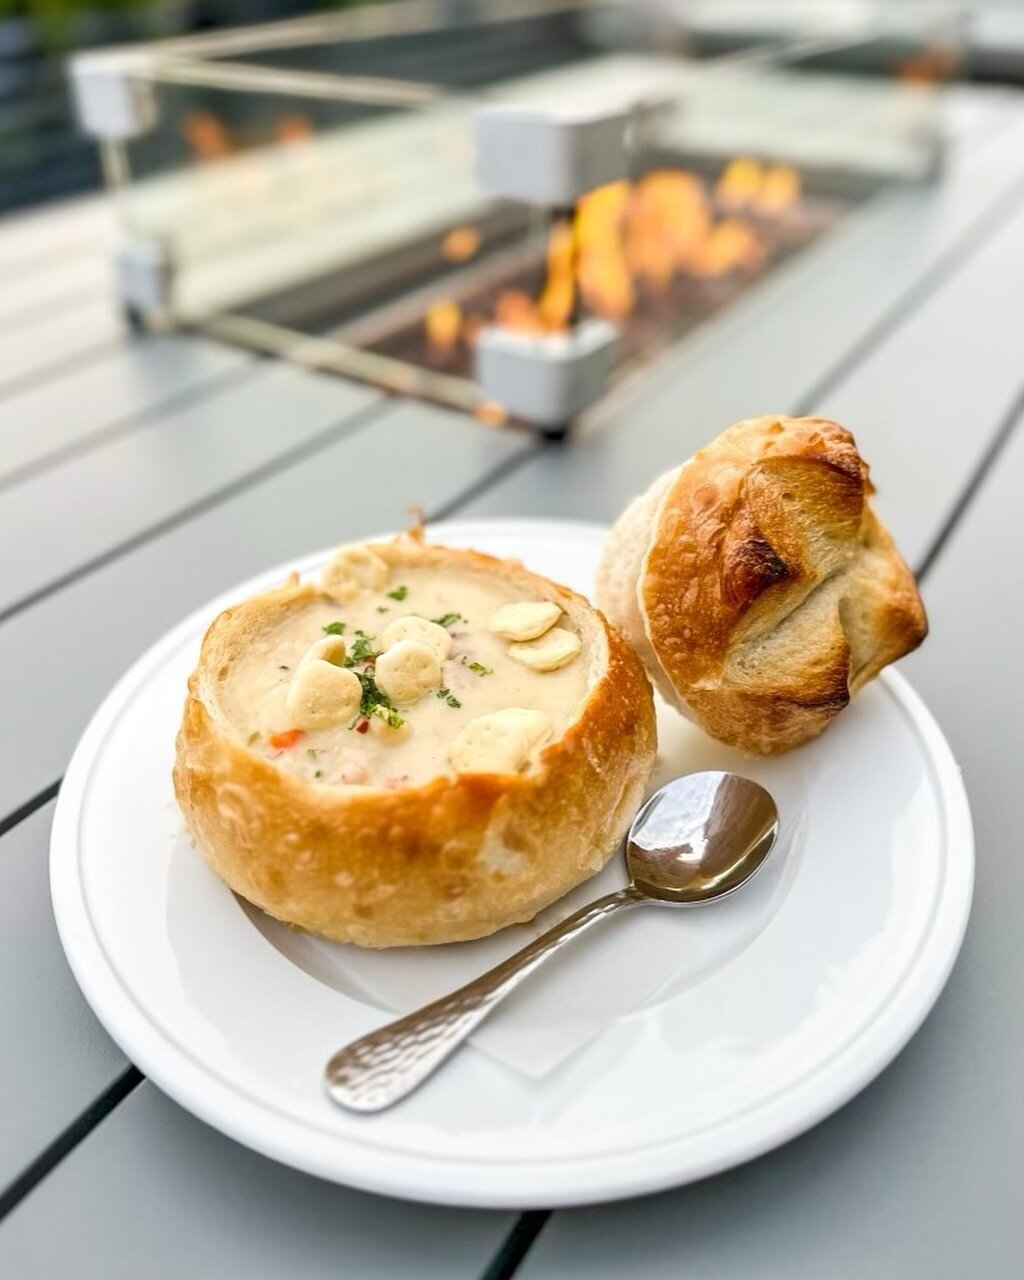 Warm up with a bowl of our delicious homemade clam chowder! 💛 By the cup or sourdough bread bowl. 

Prefer to have it at home? Stop by @pelagicfishmarket and pick up a pint or quart to-go! 🎣